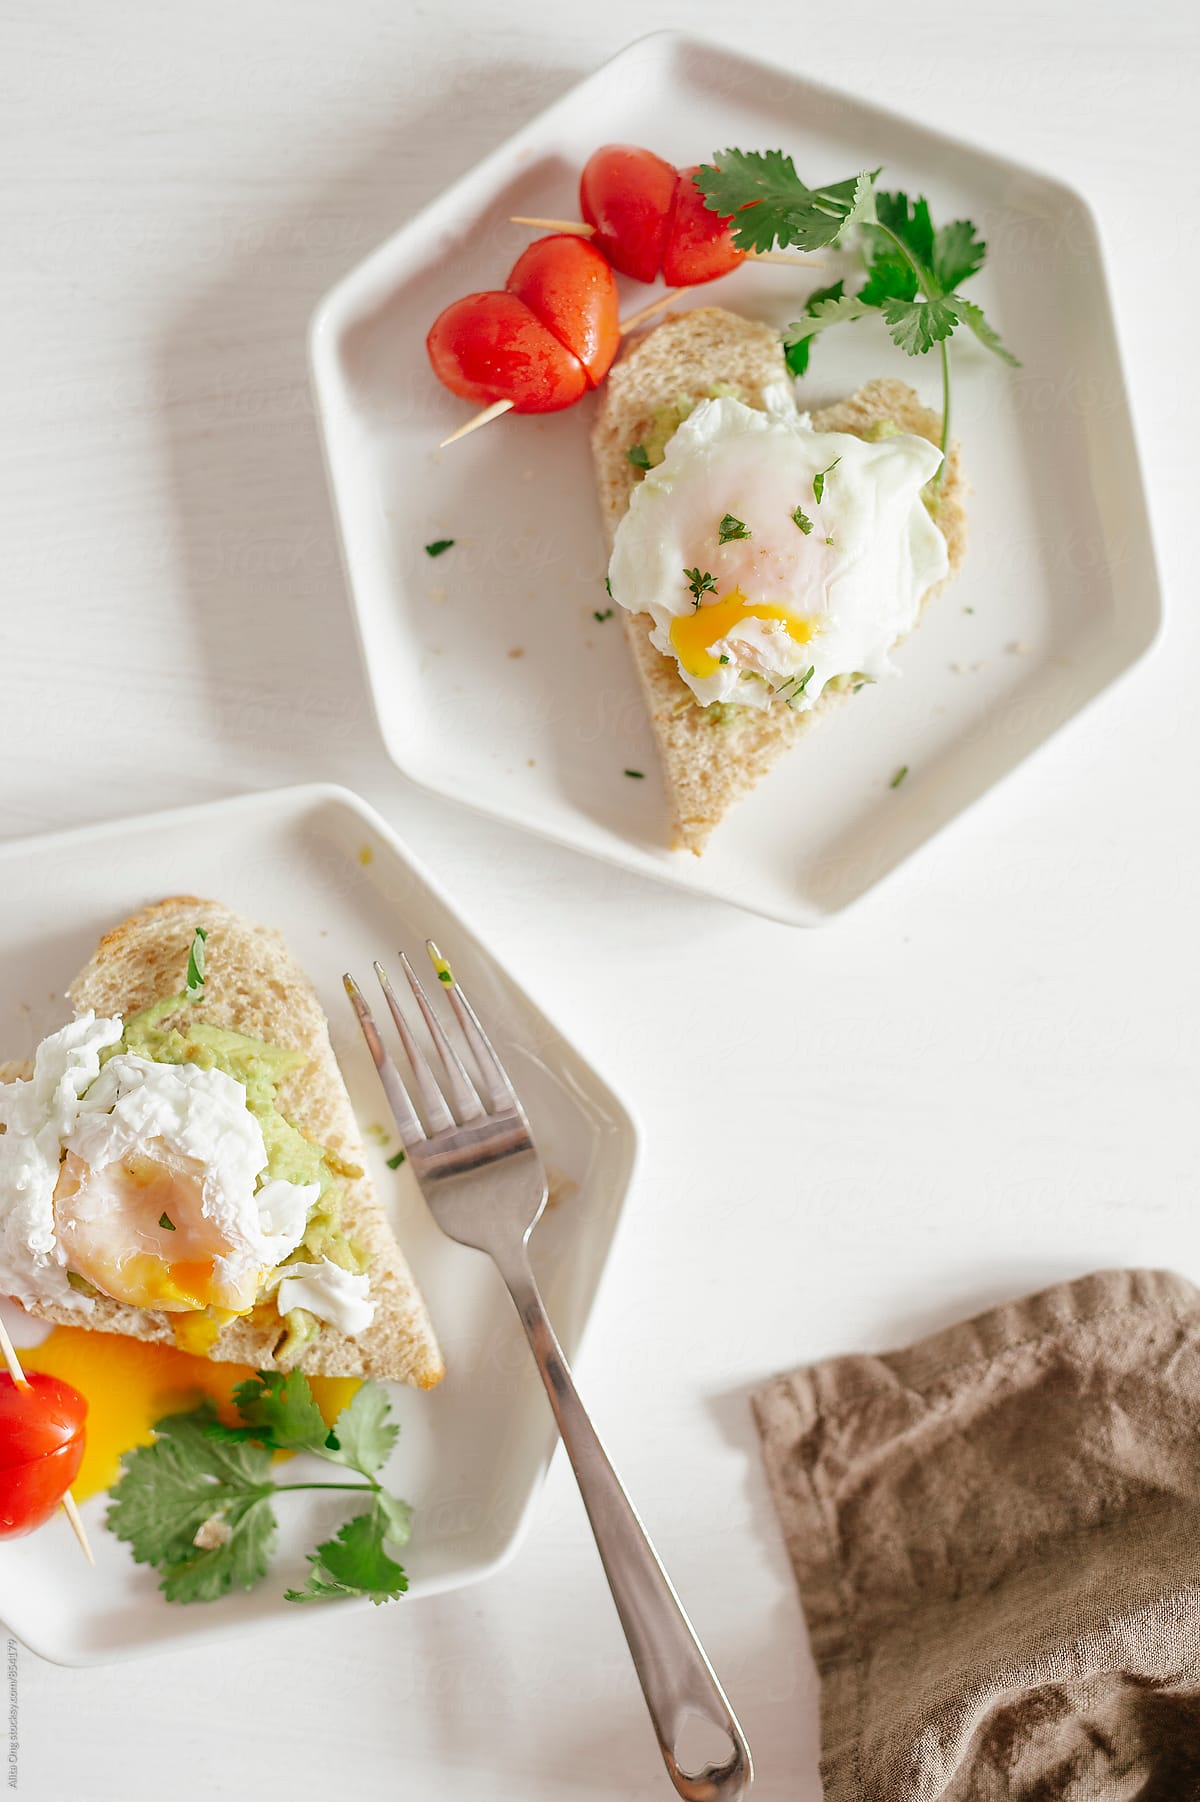 Heart-shaped avocado toast with poached egg and cherry tomatoes